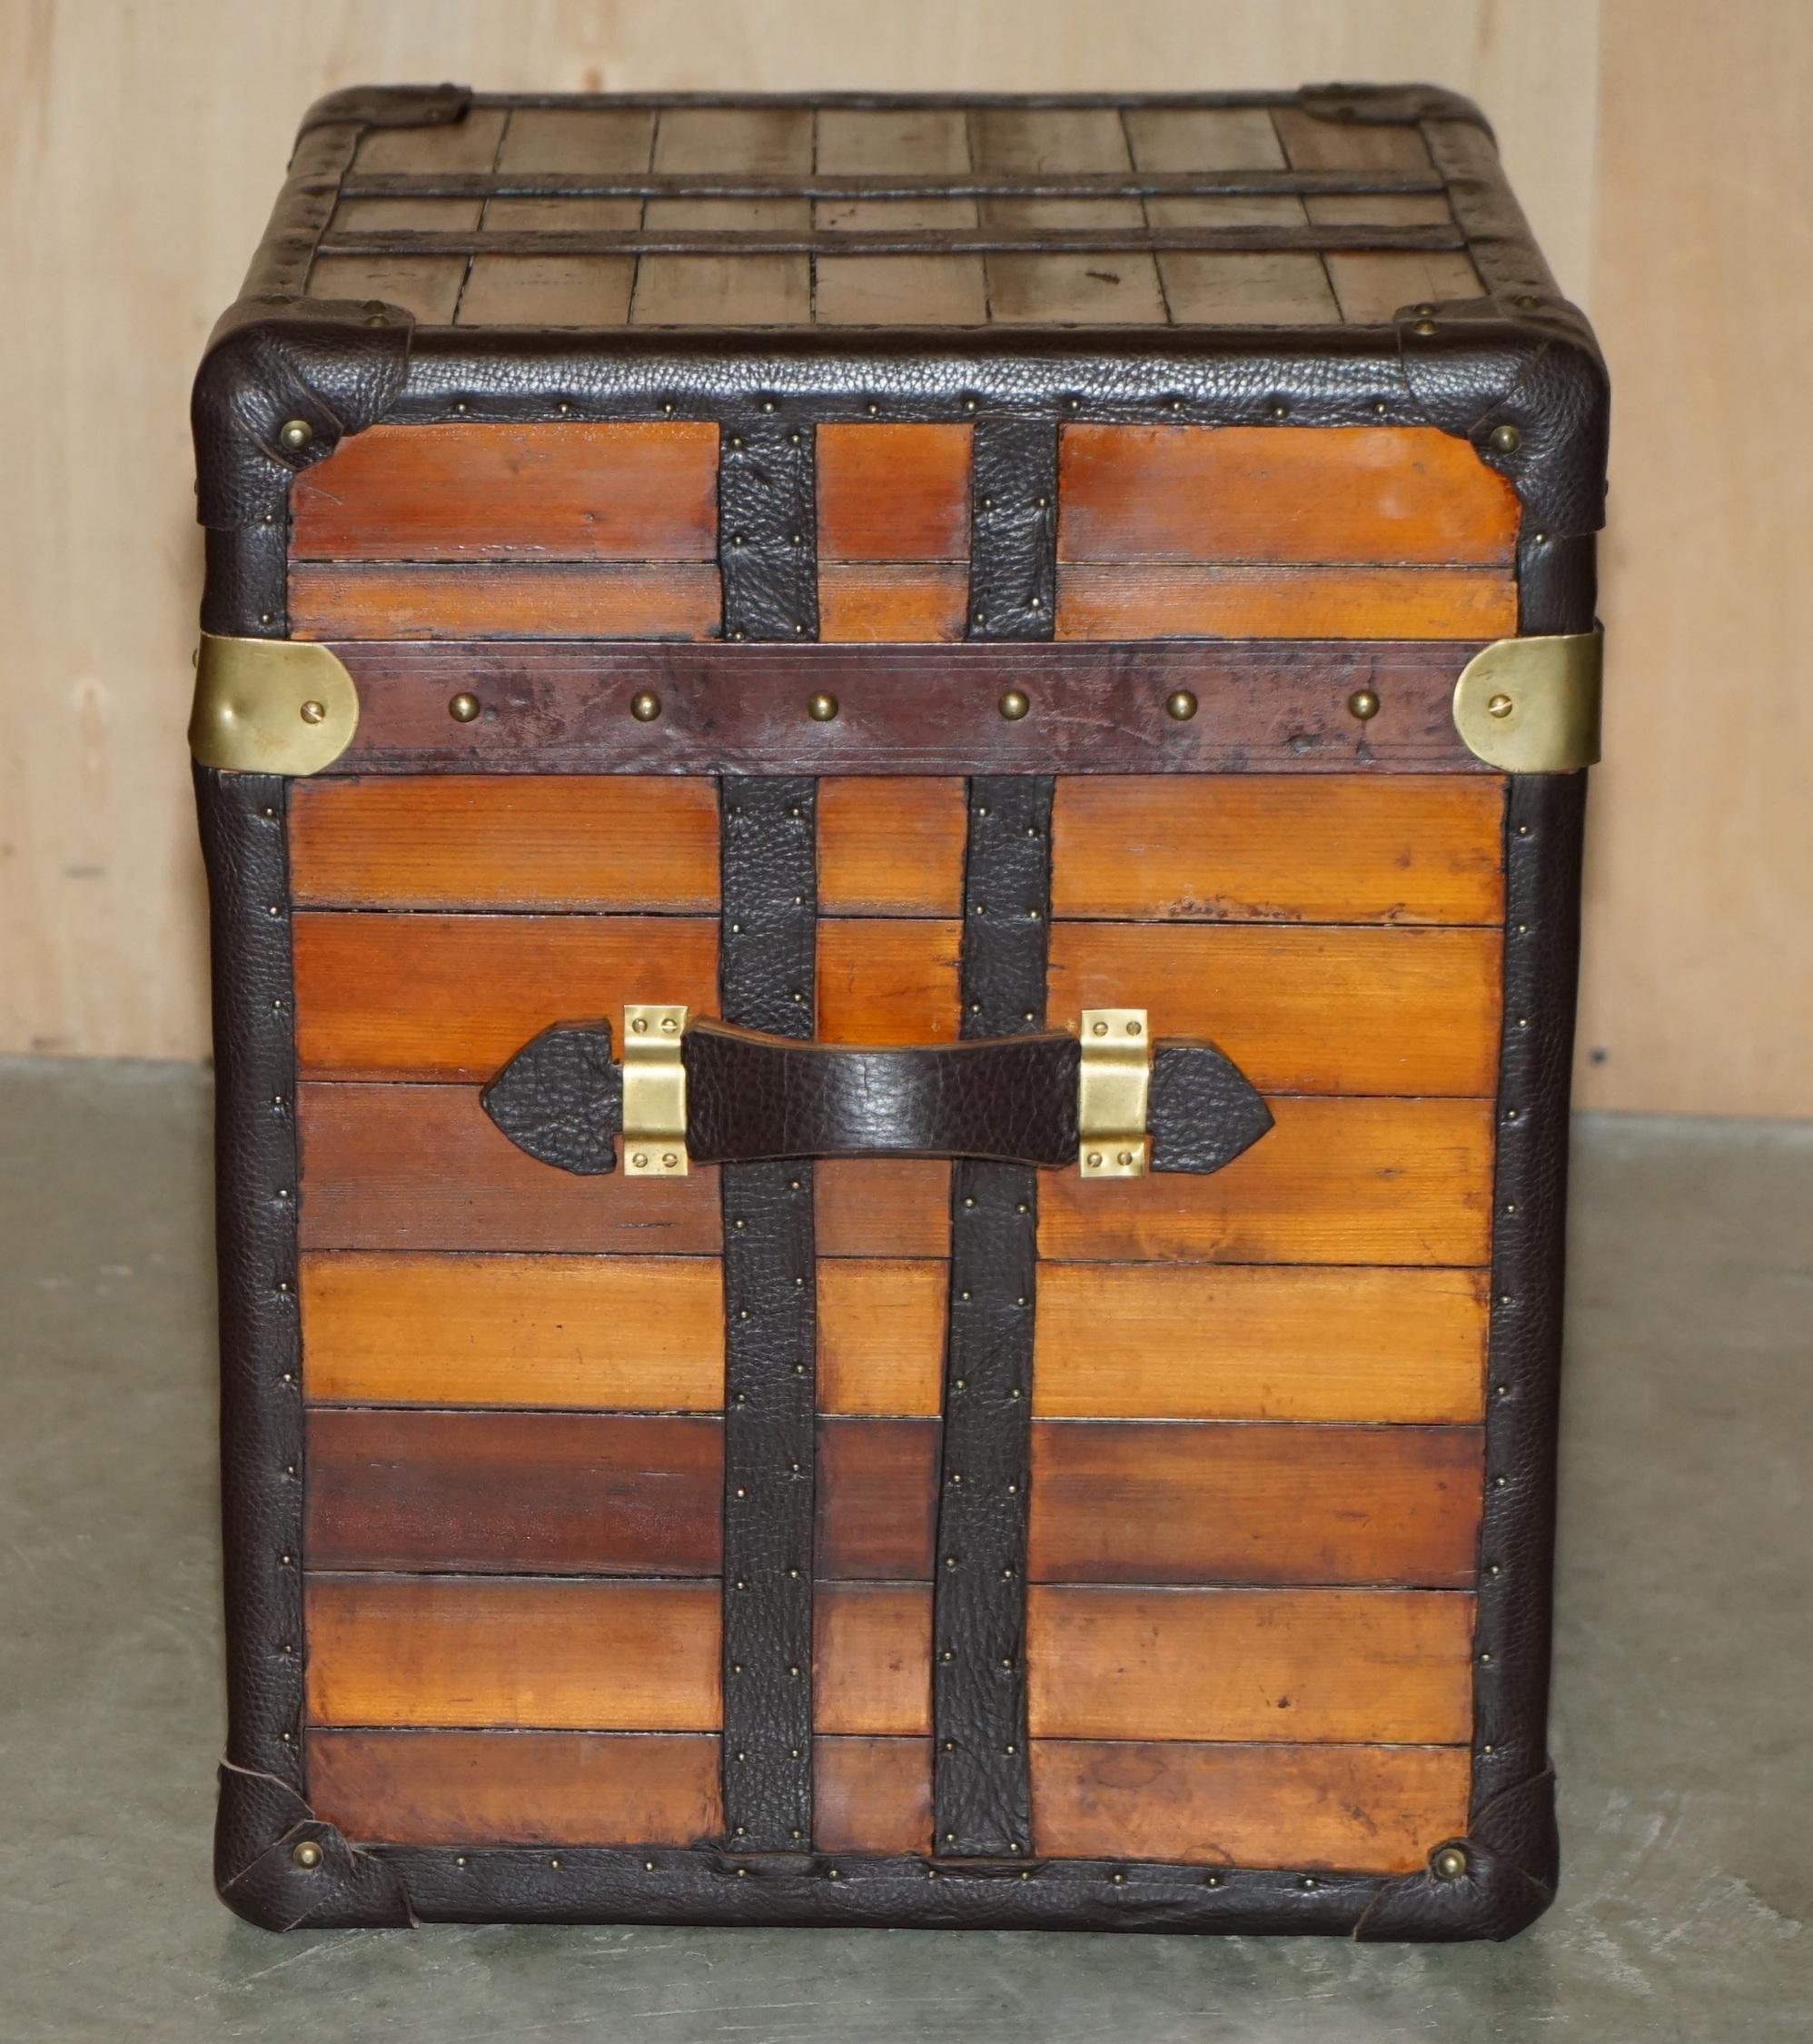 PAIR OF STUNNING ViNTAGE ENGLISH SIDE TABLES STORAGE TRUNKS SLATTED WOOD LEATHER 2